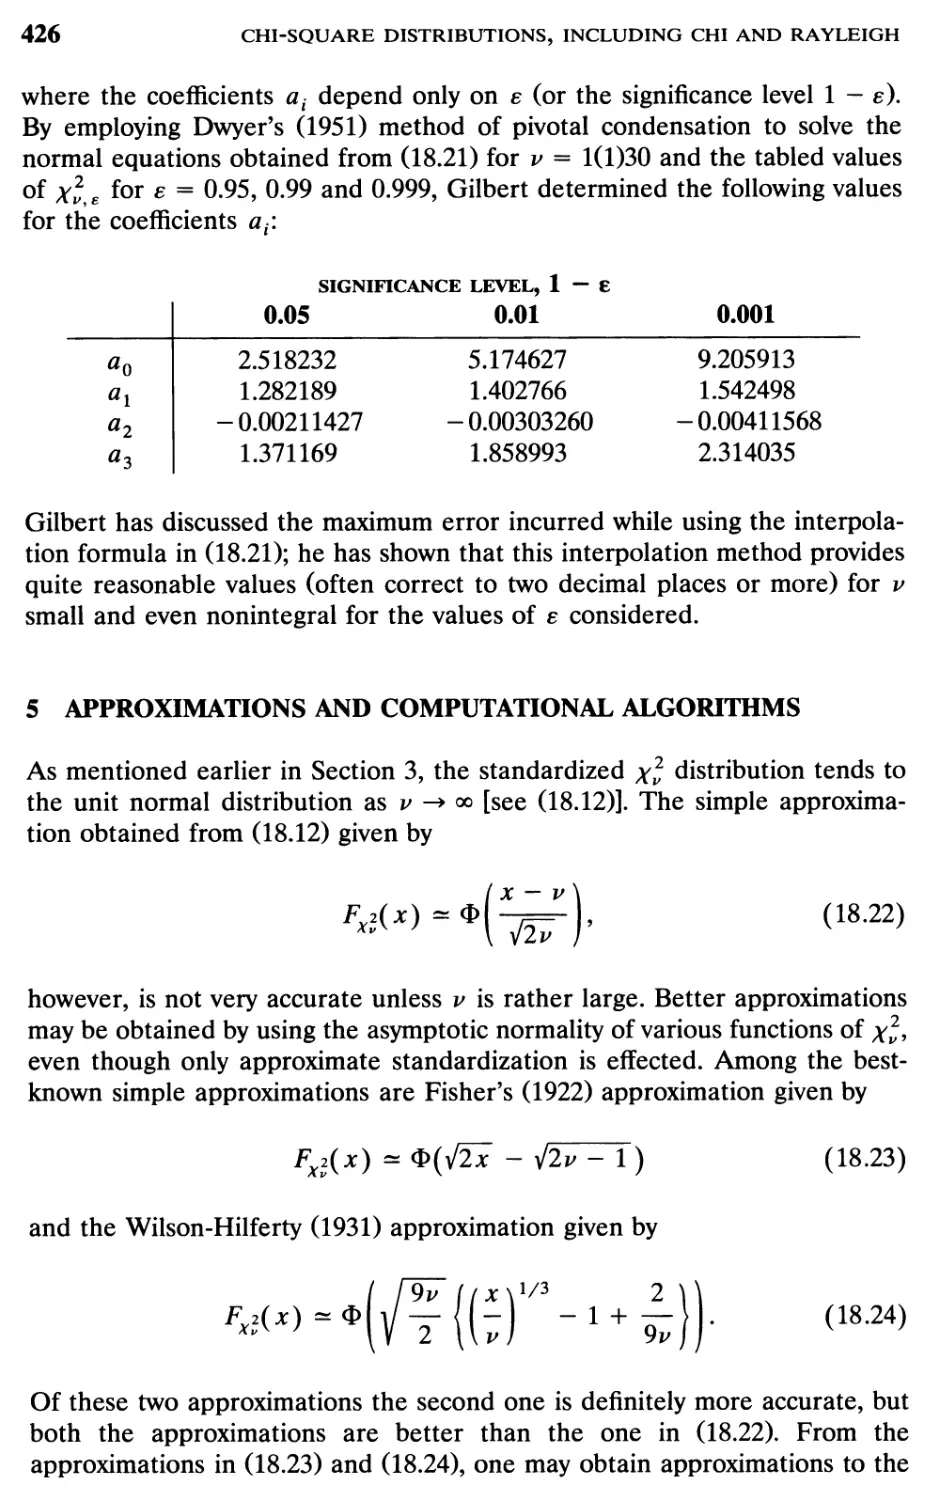 5 Approximations and Computational Algorithms, 426